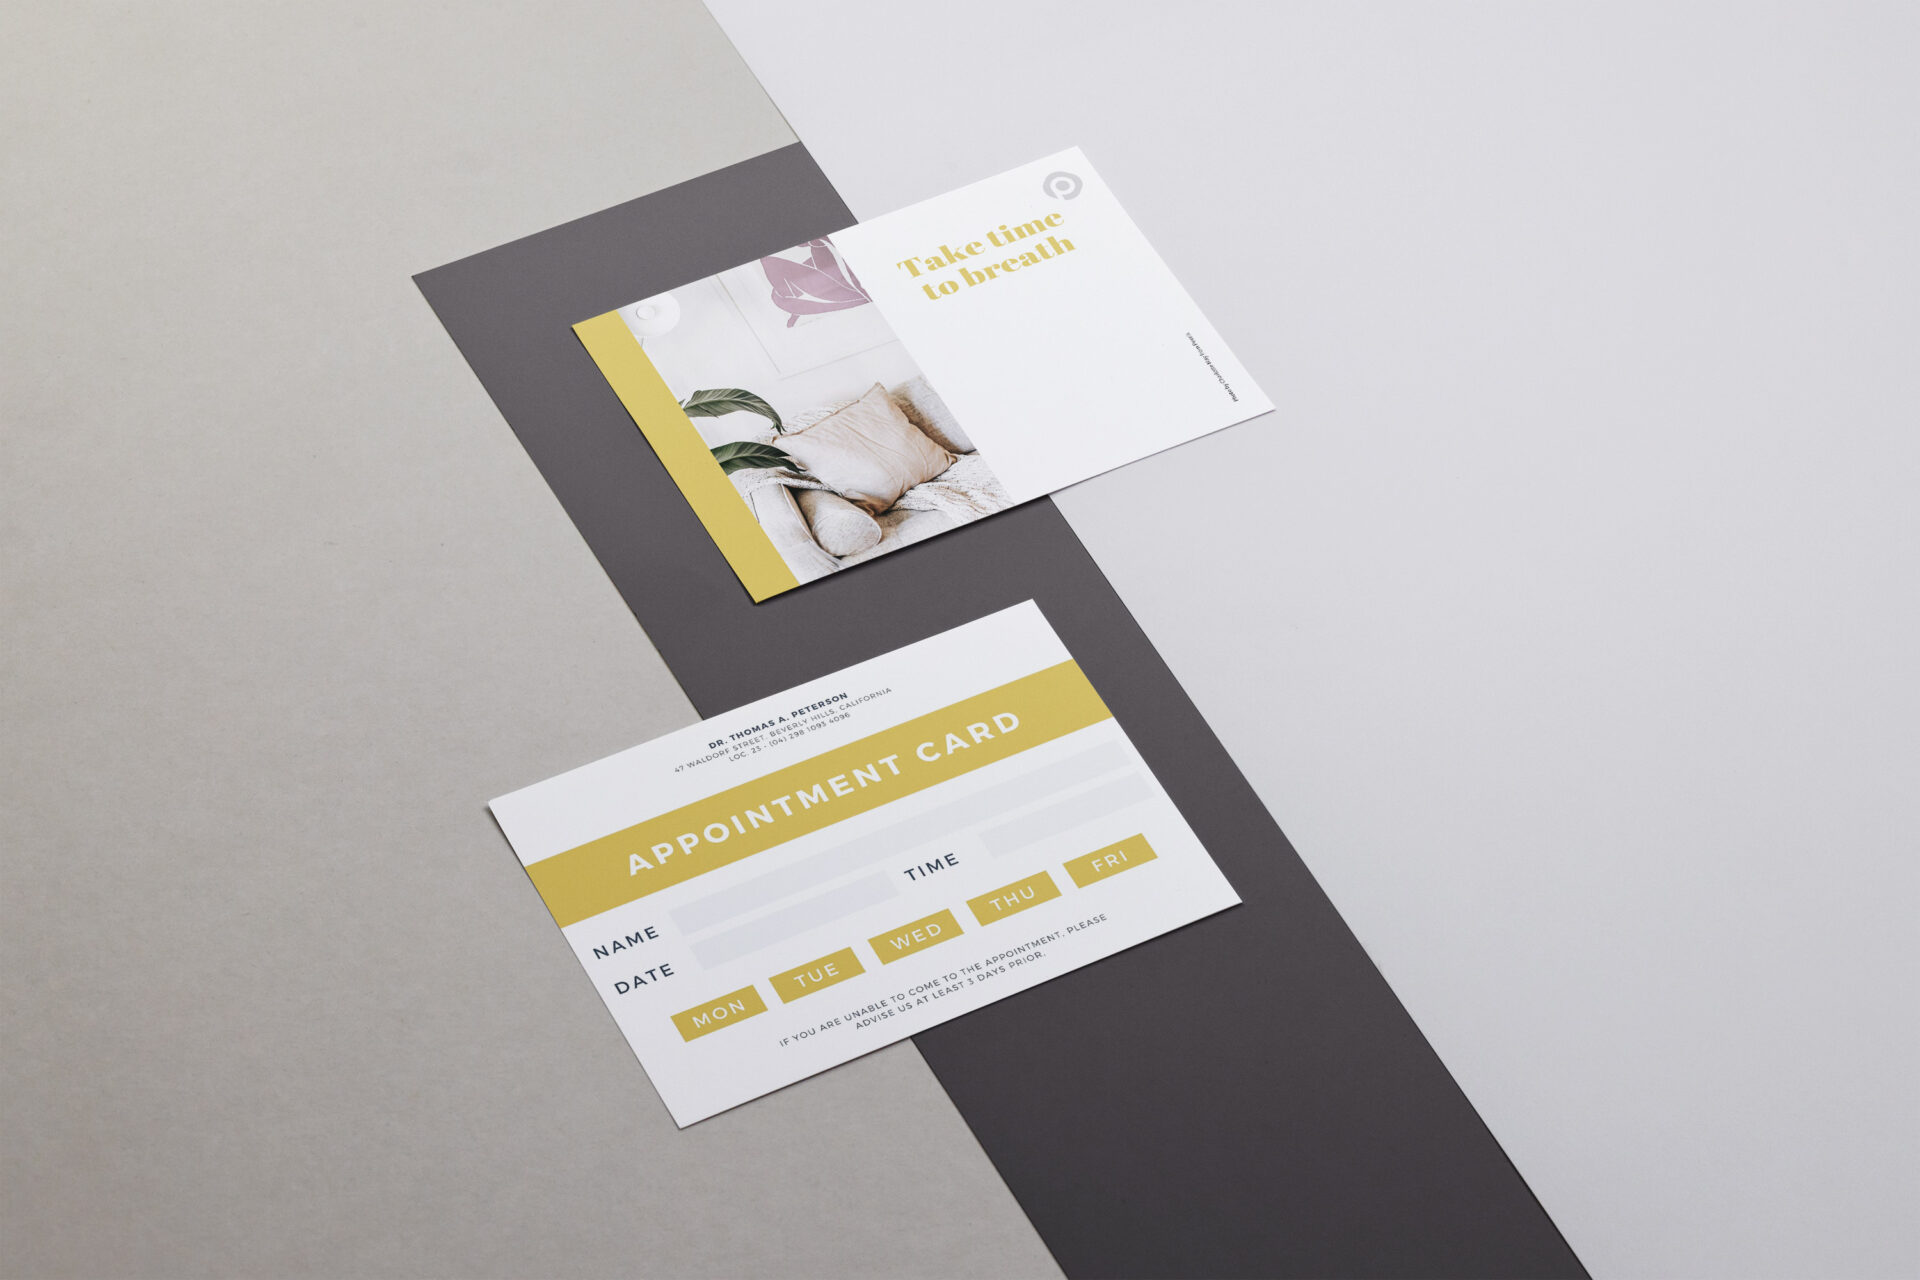 Appointment cards in Madrid - Print with Pagerr